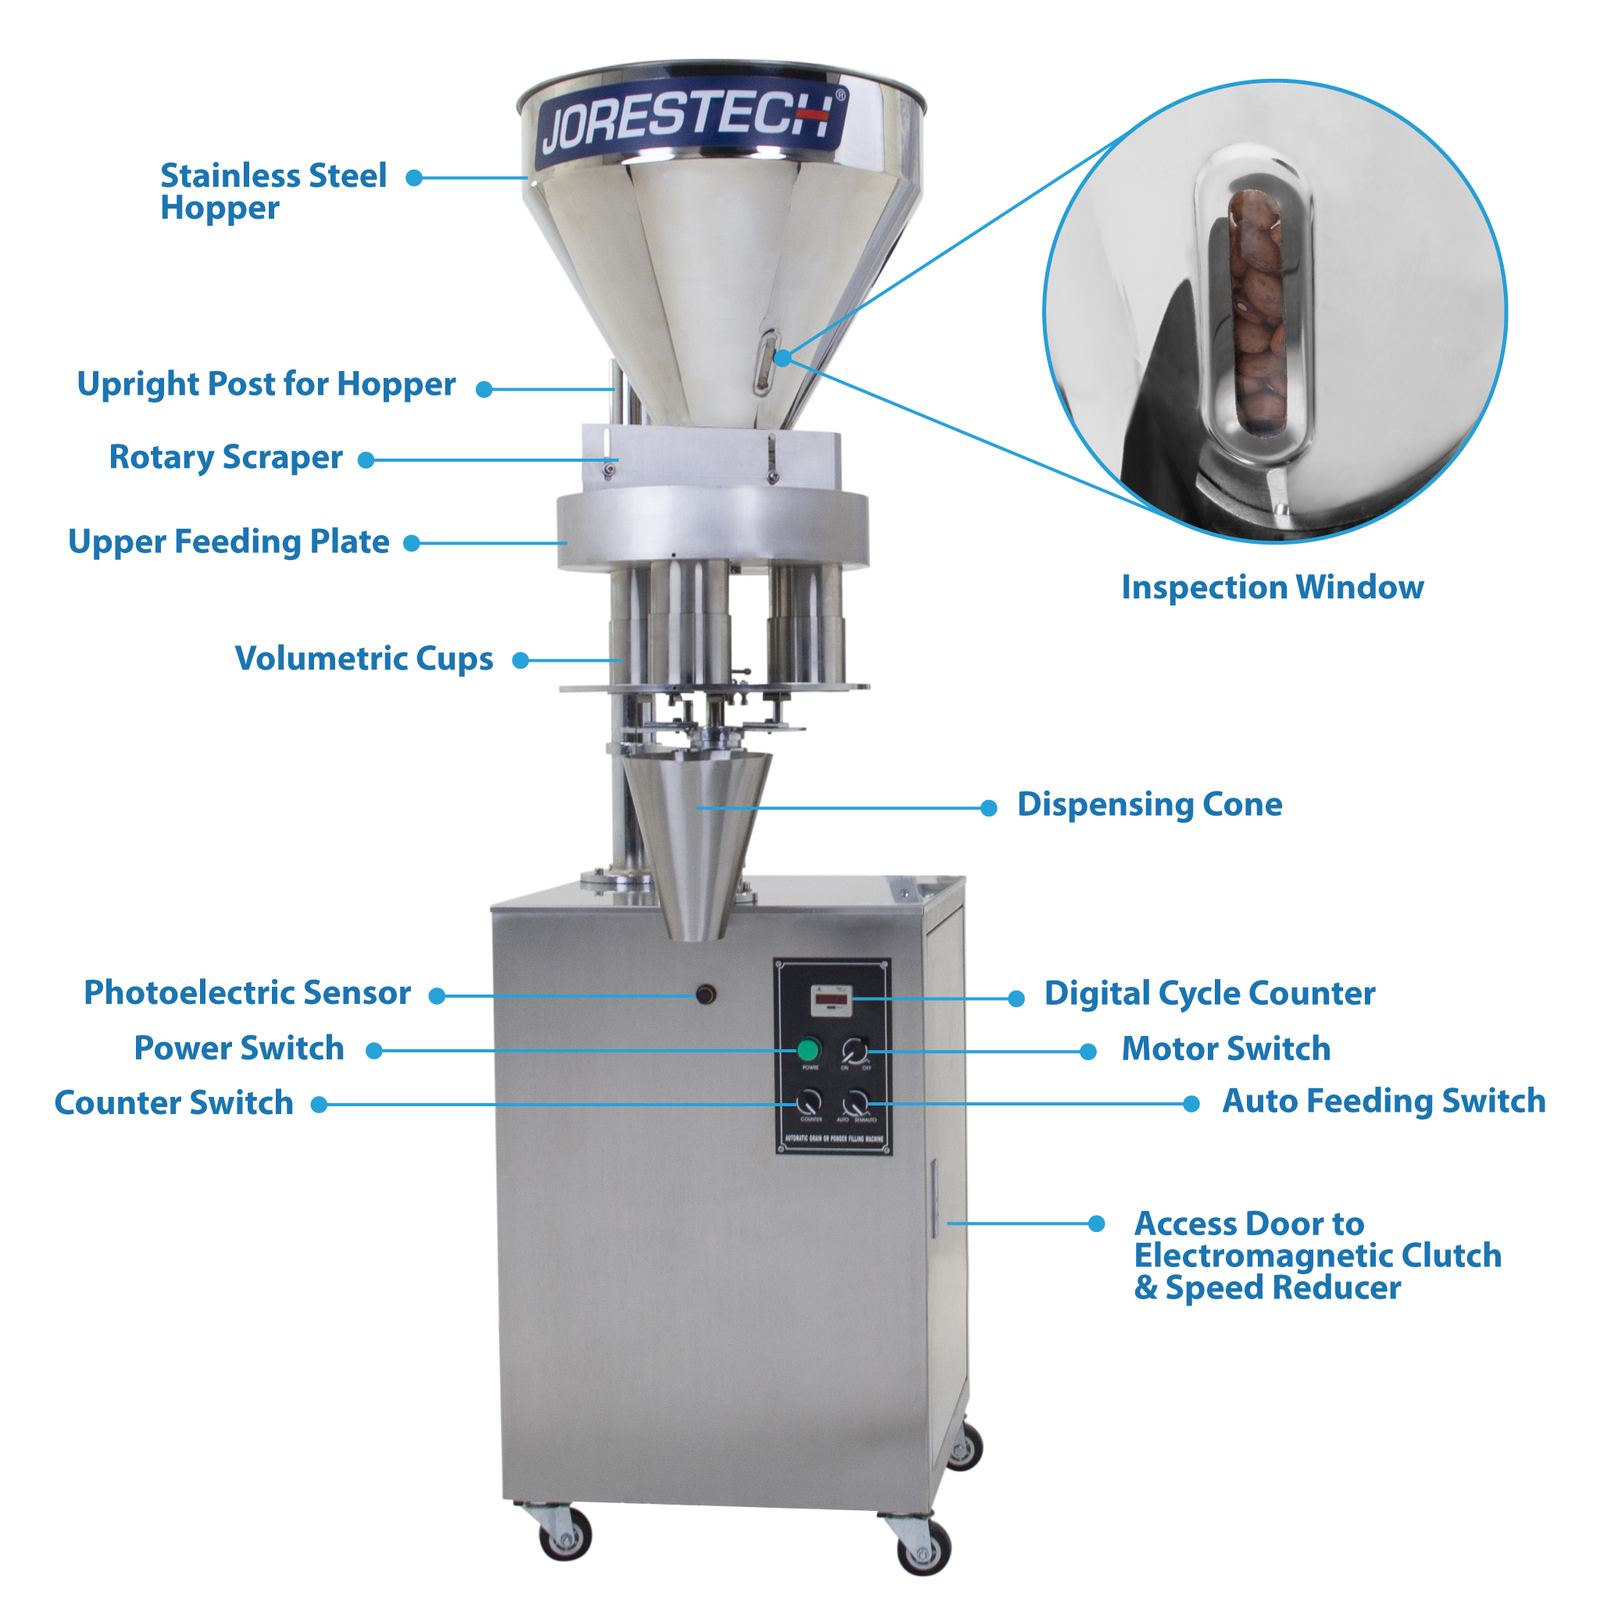 Infographic of the JORES TECHNOLOGIES® semi automatic volumetric filler. Call-outs are signaling features of the filling machine like: Inspection Window, stainless steel hopper, rotary scraper, dispensing cone, digital cycle counter and more.